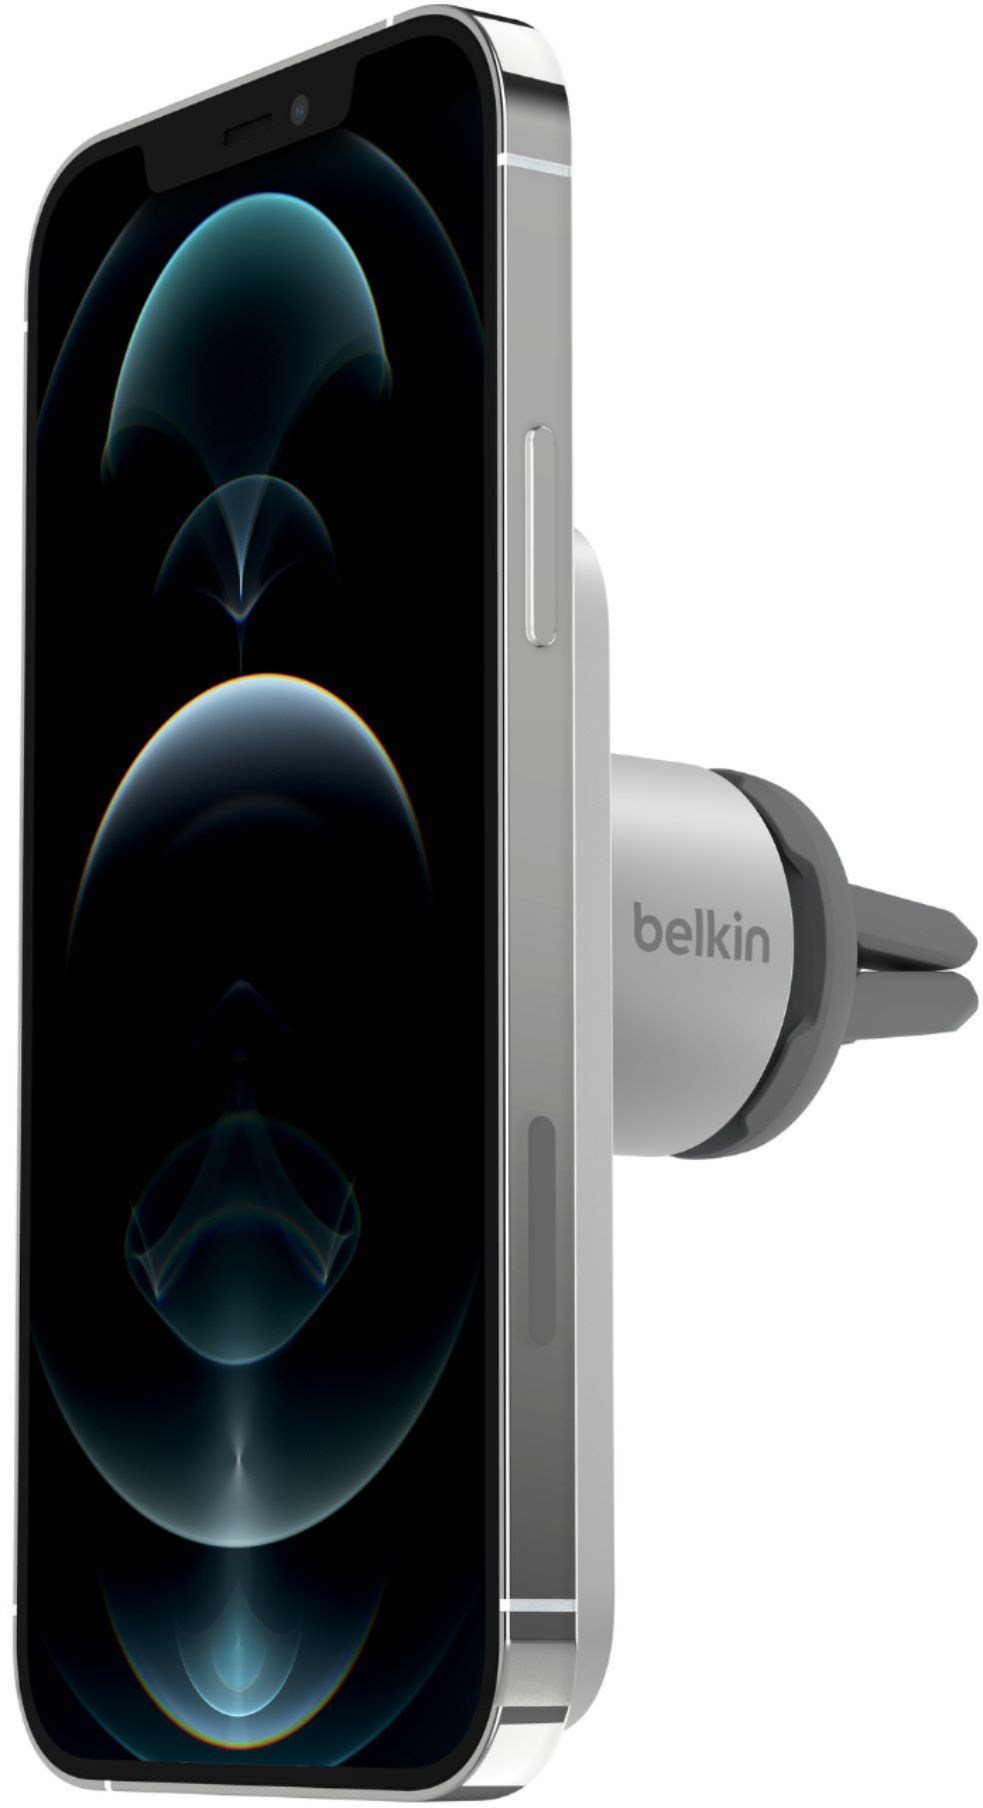 Smartphone Accessories: Belkin MagSafe Car Mount $33, more from $9